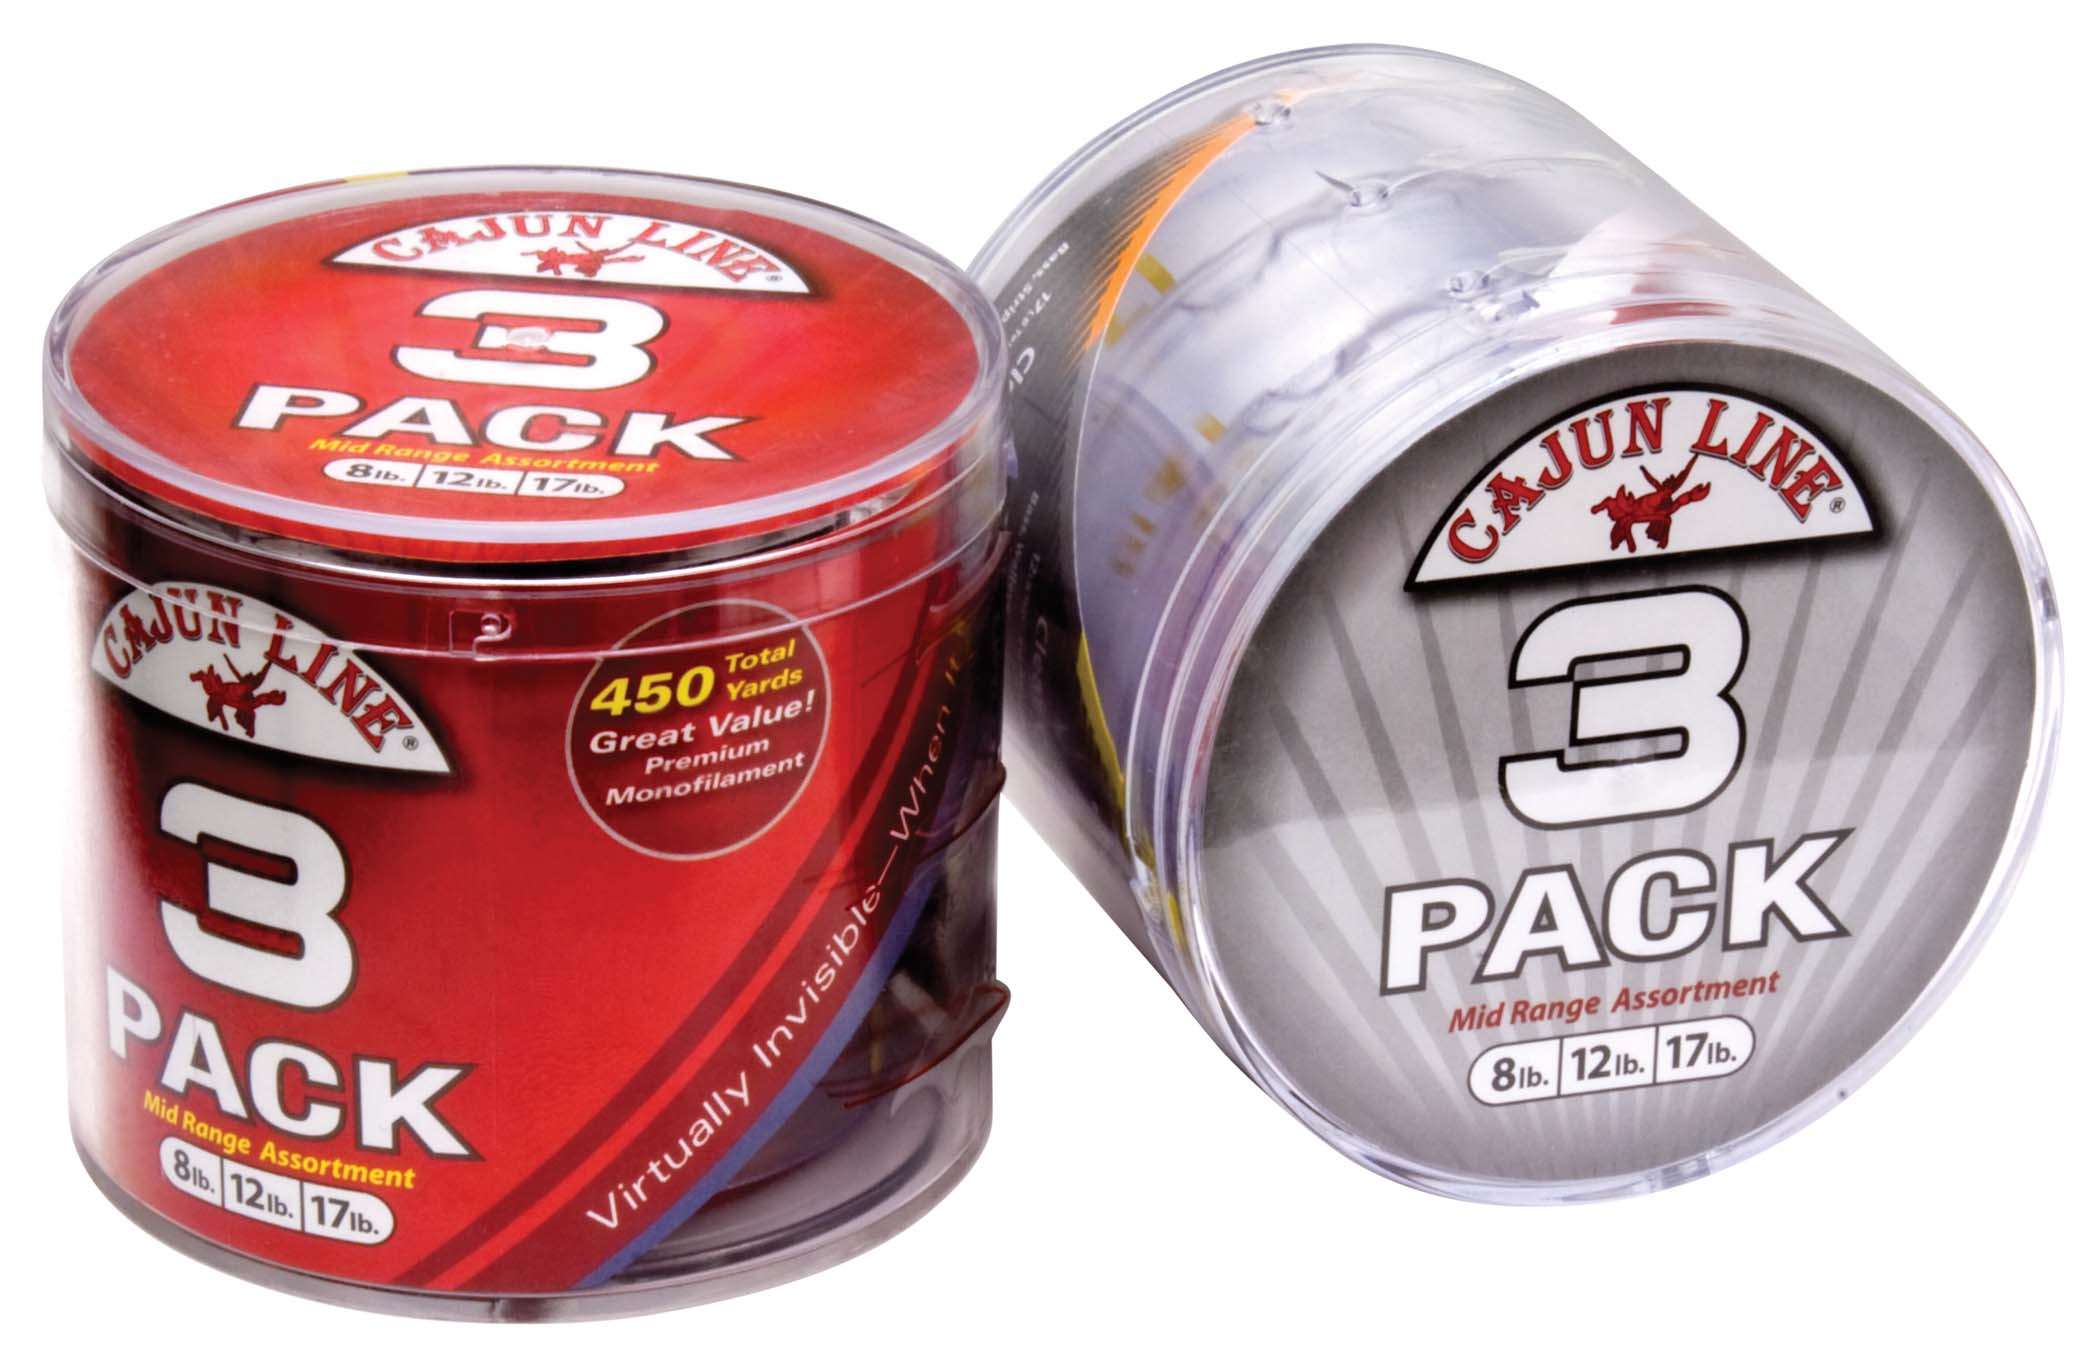 Cajun 3-pack<br>Not sure which pound-test line you need? Grab a 3-pack from Cajun. Four options cover any scenario: multi-purpose has 6, 10, and 17; ultra-light has 4, 6, and 8; mid-range has 8, 12, and 17; and heavy-duty has 15, 20 and 30.